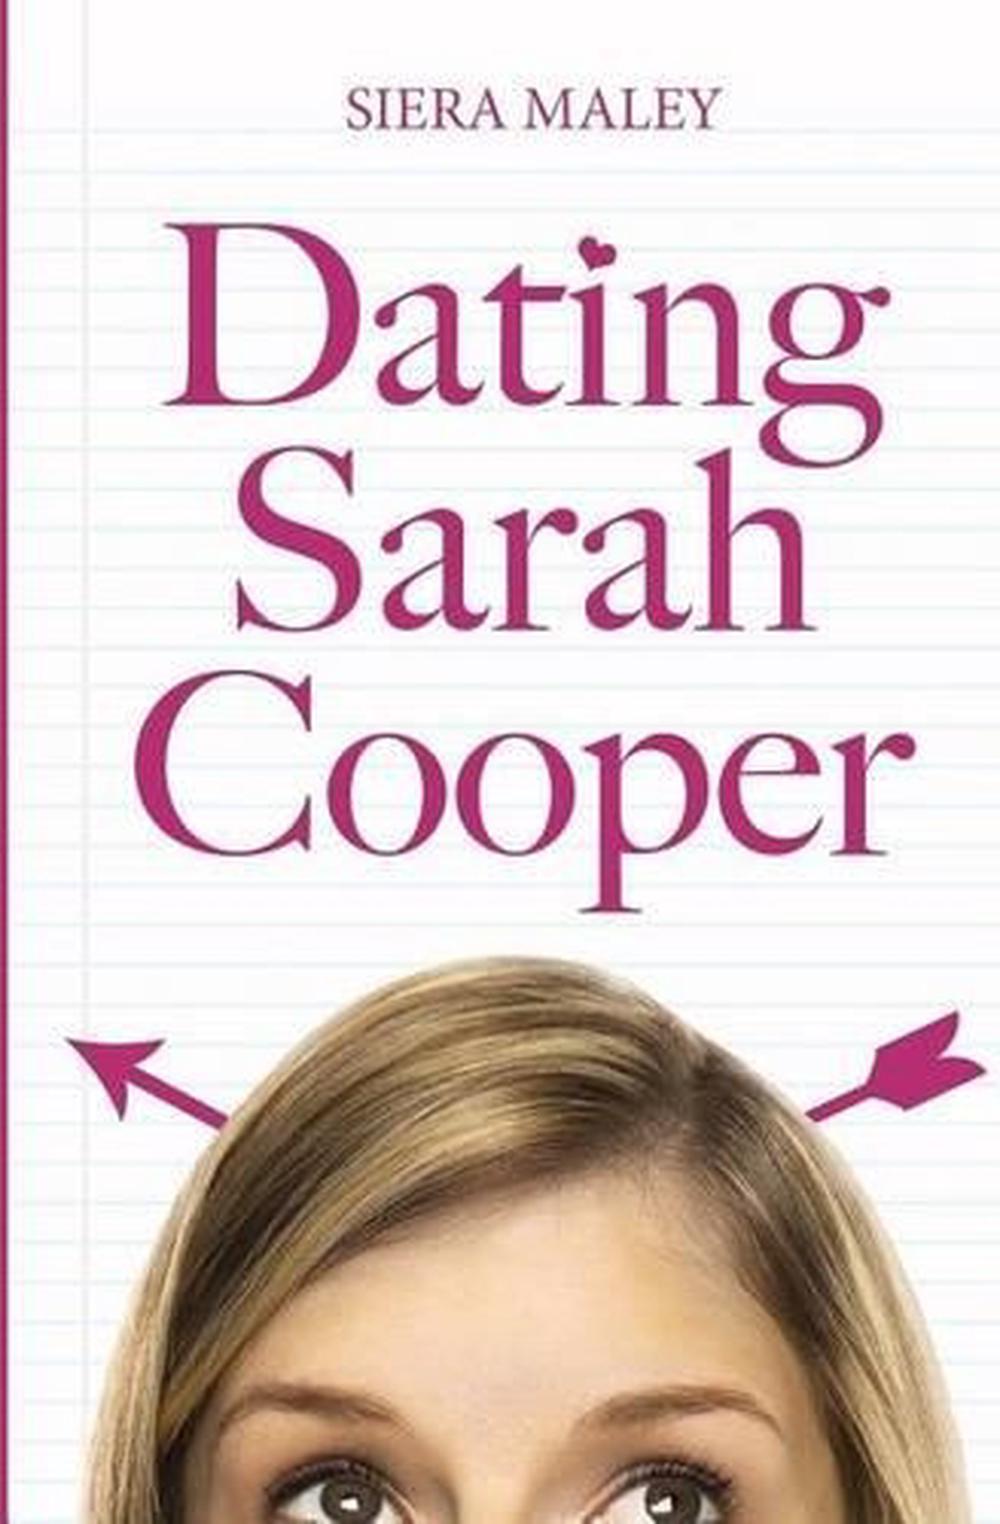 Dating Sarah Cooper by Siera Maley